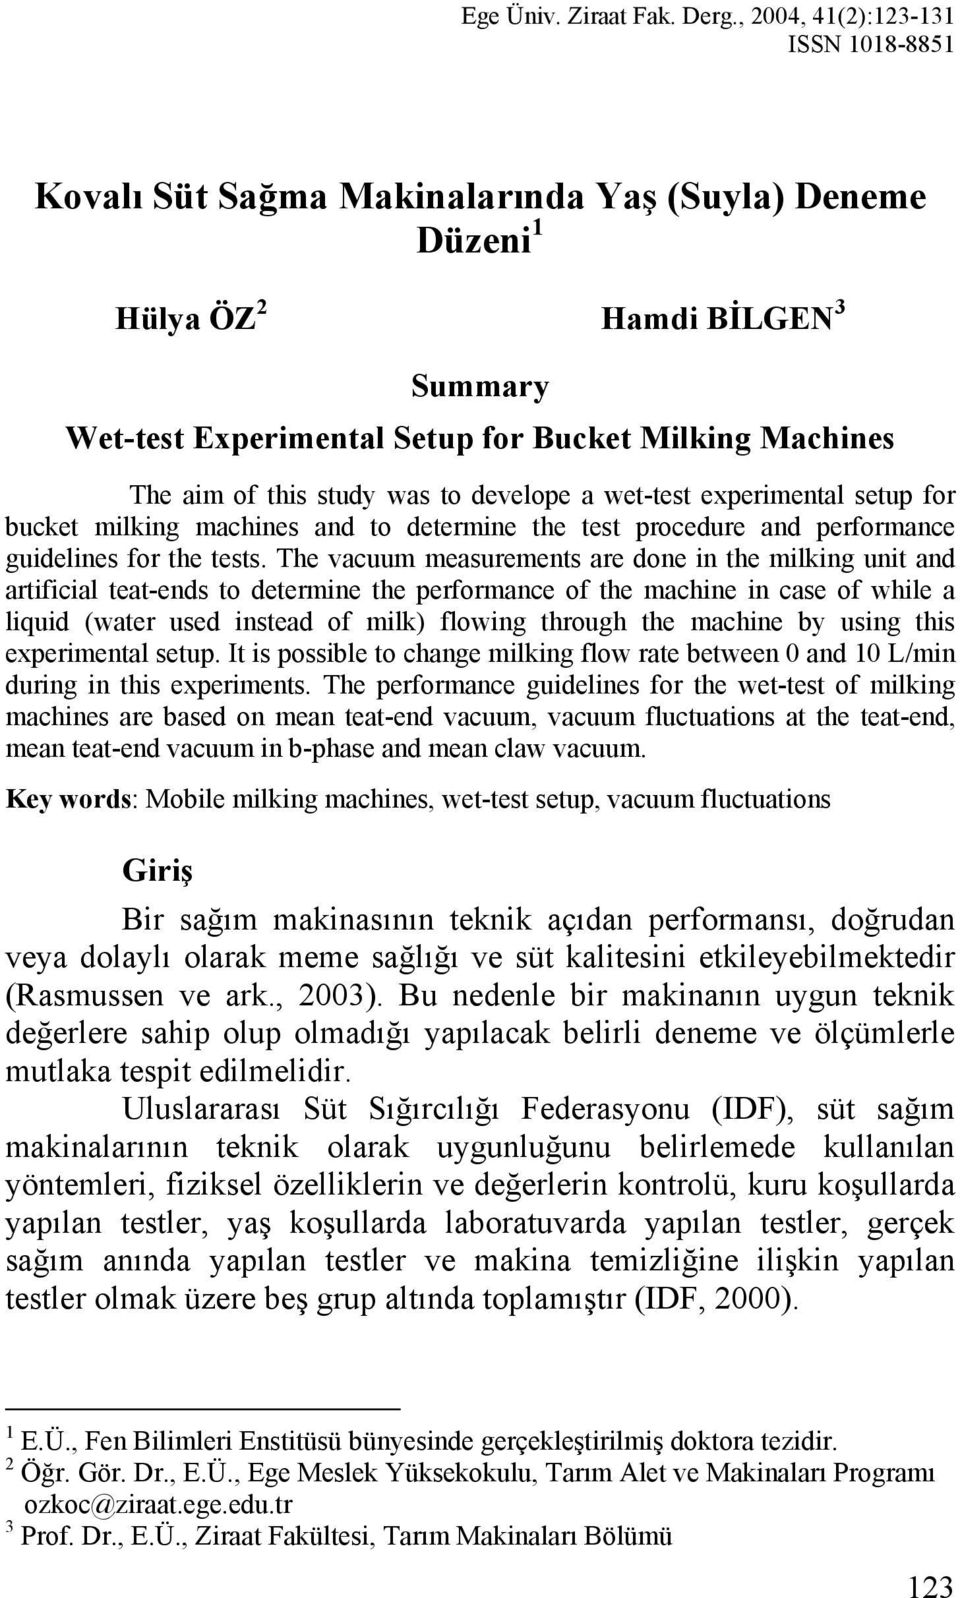 this study was to develope a wet-test experimental setup for bucket milking machines and to determine the test procedure and performance guidelines for the tests.